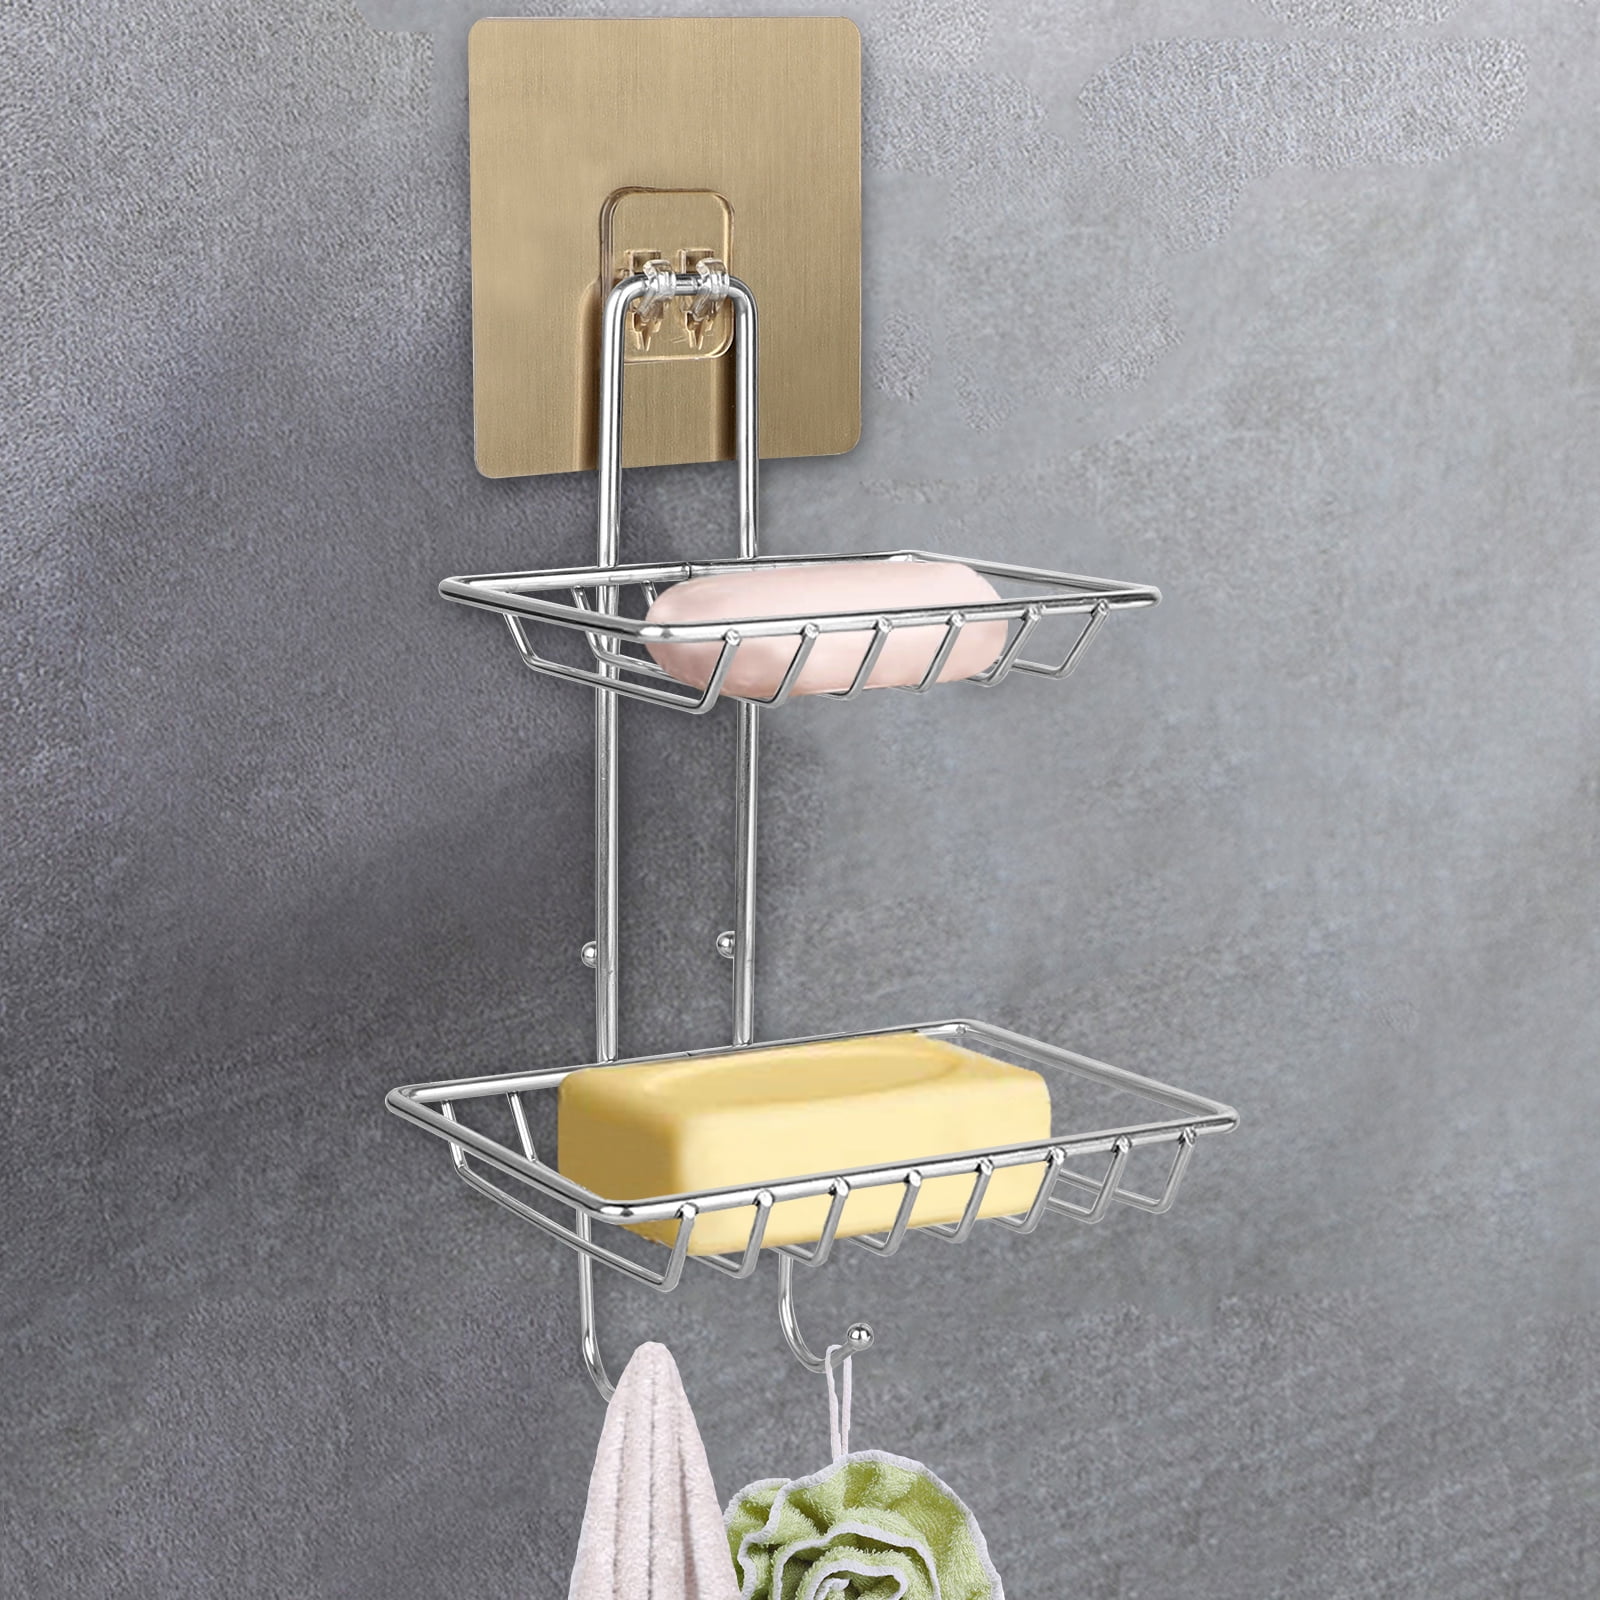 Kitchen Storage Rack Sponge Container Magnetic Soap Holder Wall-Mounted